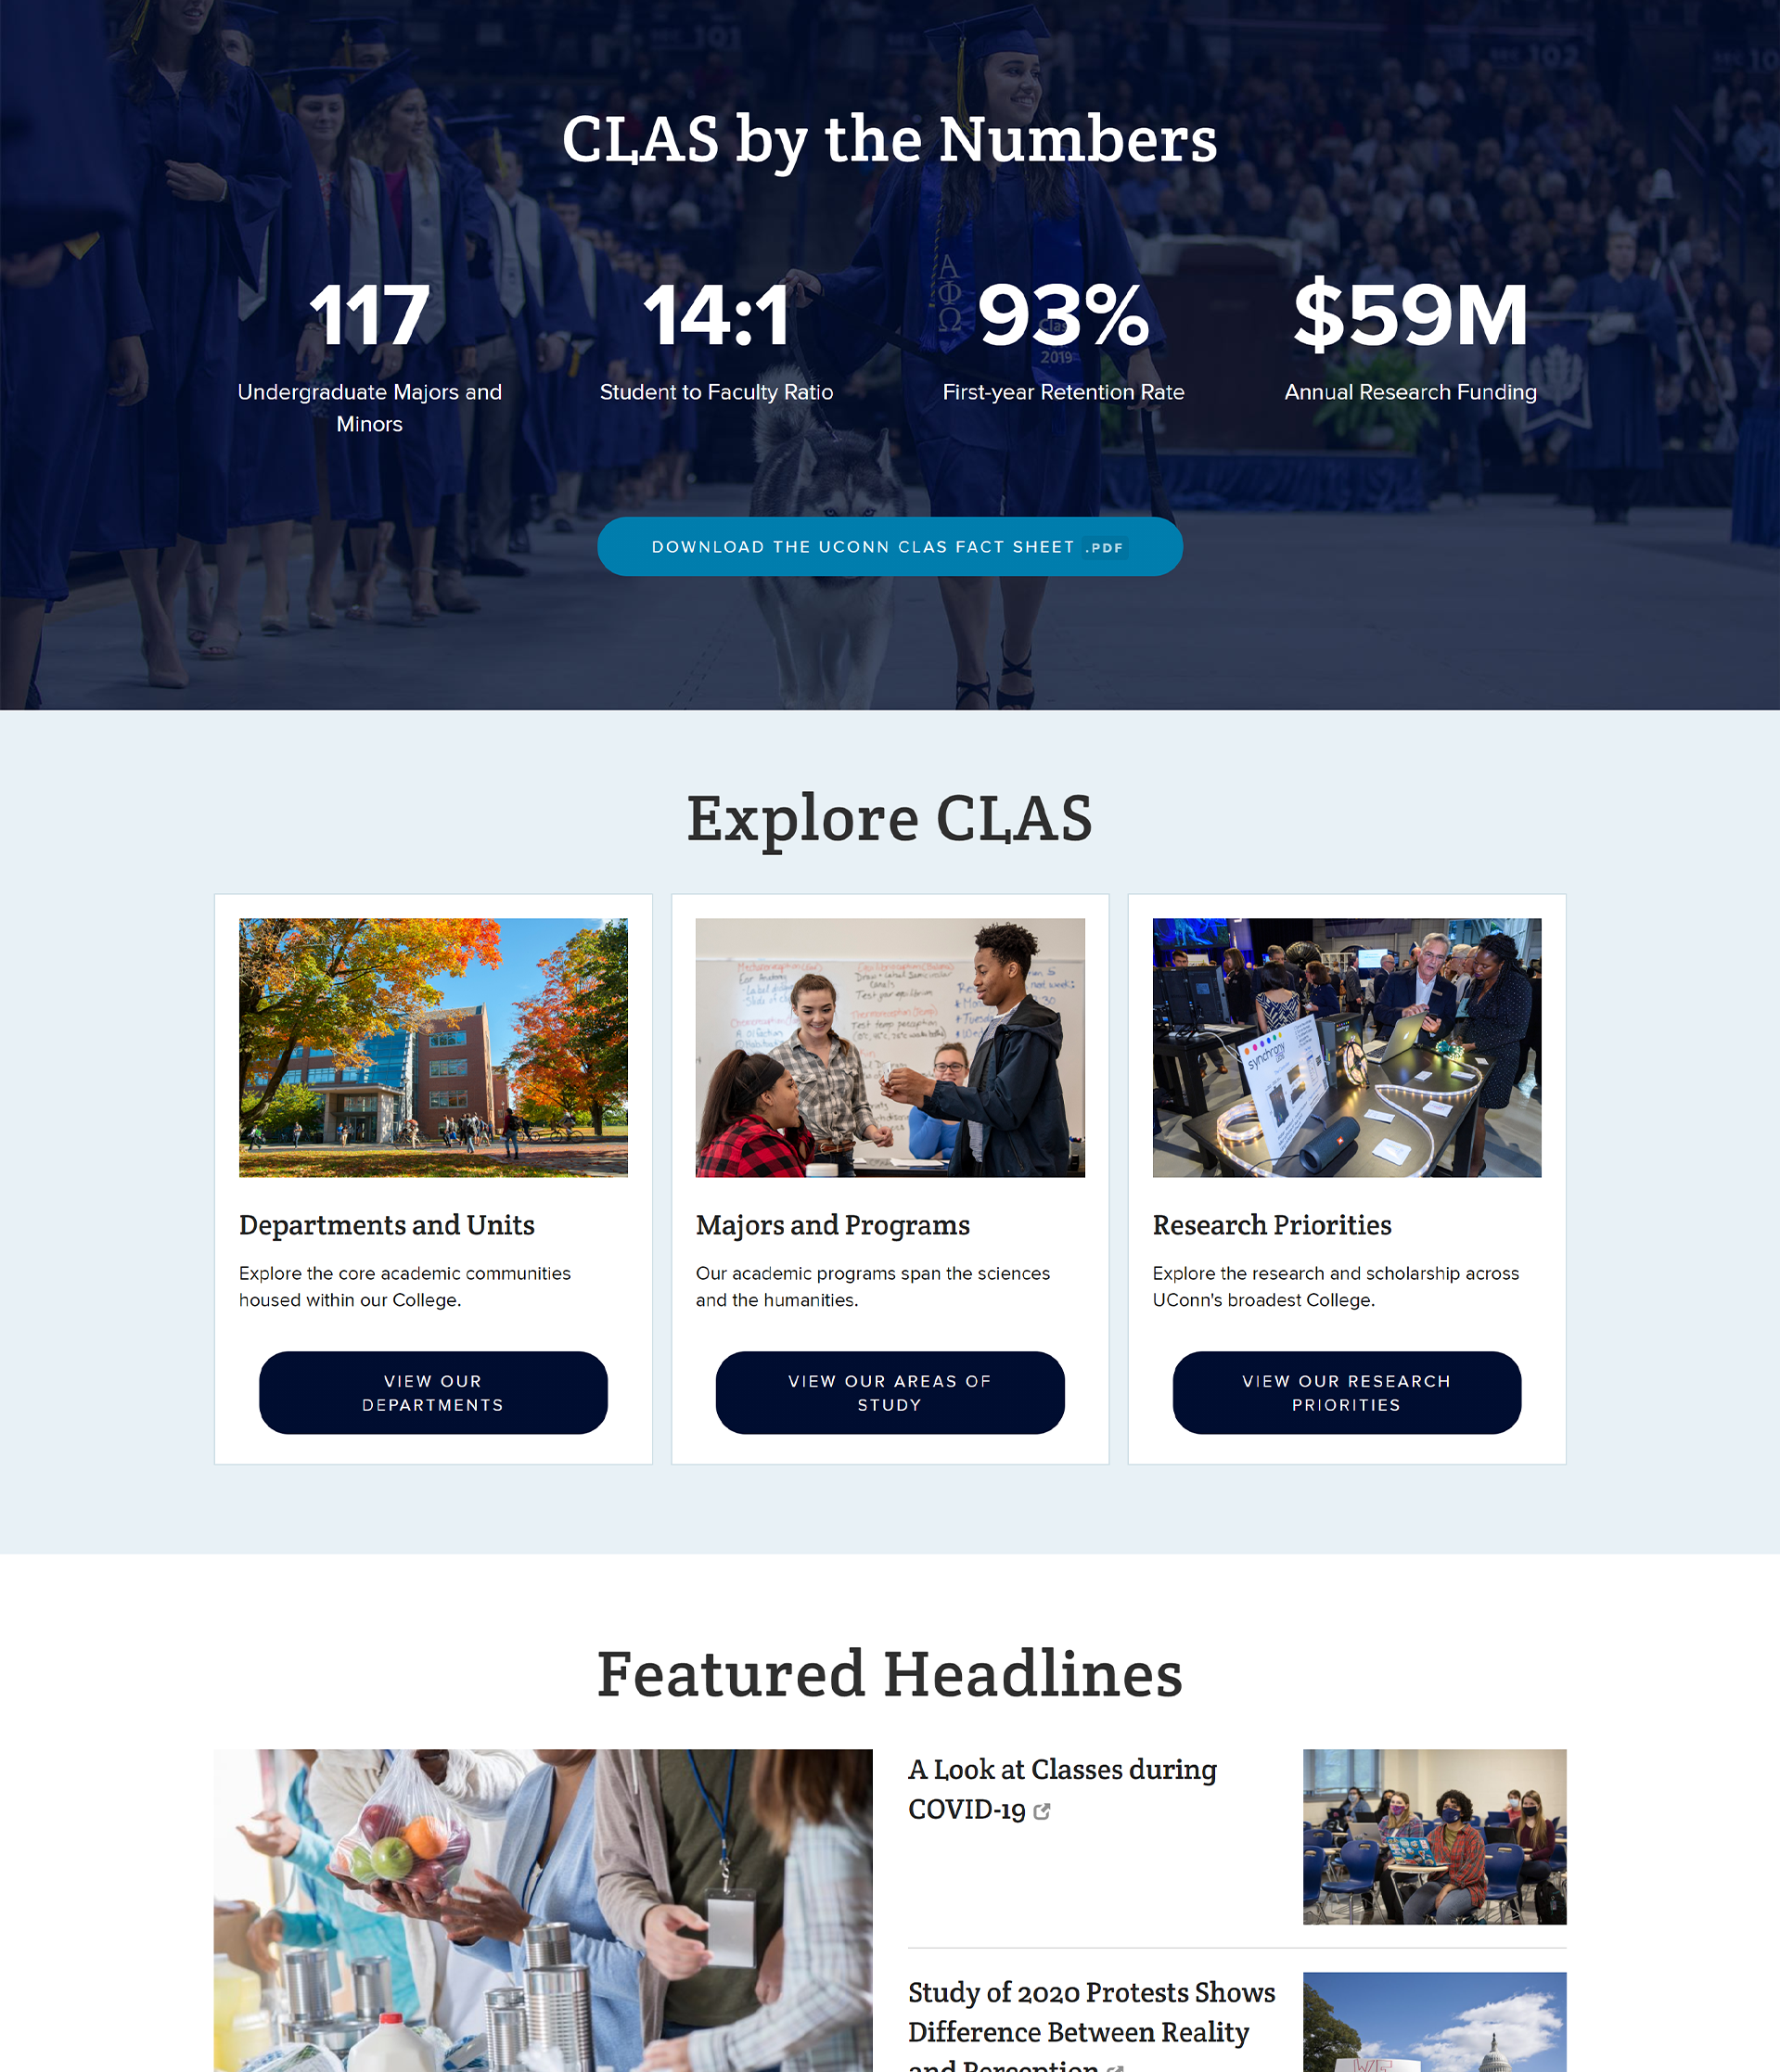 Screenshot of an interior page of the CLAS website